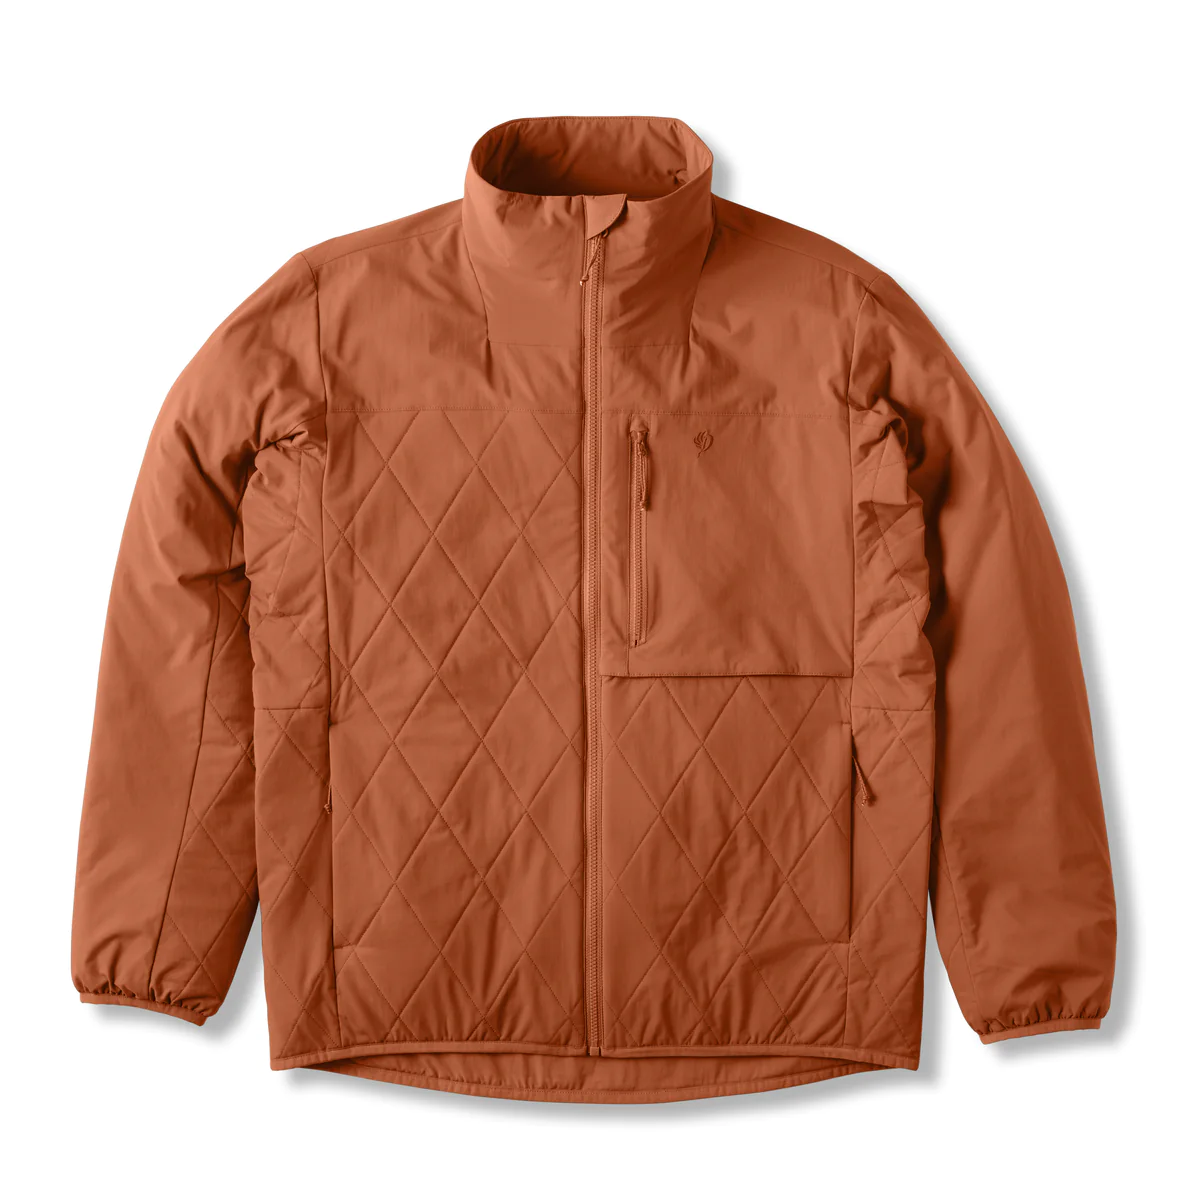 Airflow Insulated Jacket - Rivers & Glen Trading Co.